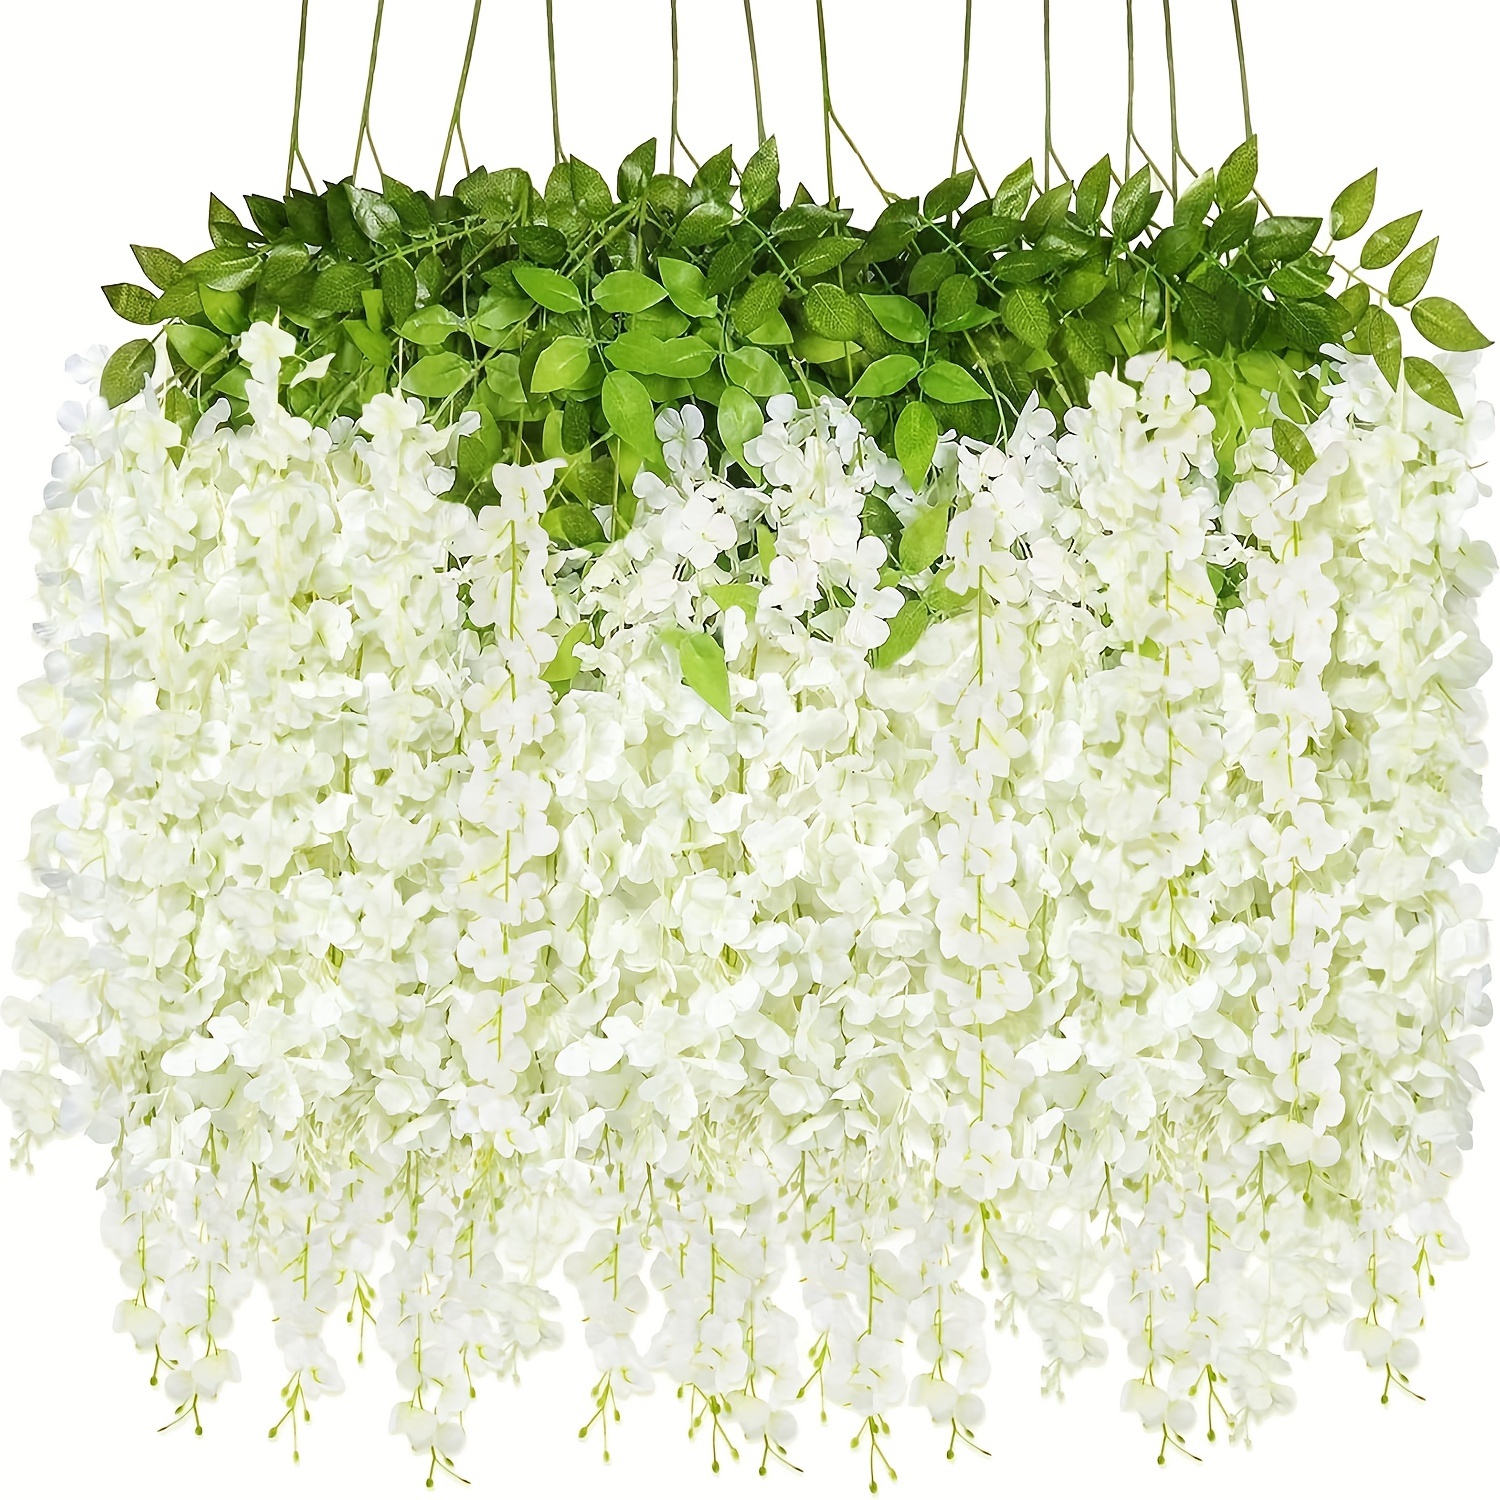 

6pcs Wisteria Hanging Flowers 3.6ft Artificial Vines Fake Garland Flower String For Wedding Party Garden Outdoor Greenery Home Wall Decoration (white)